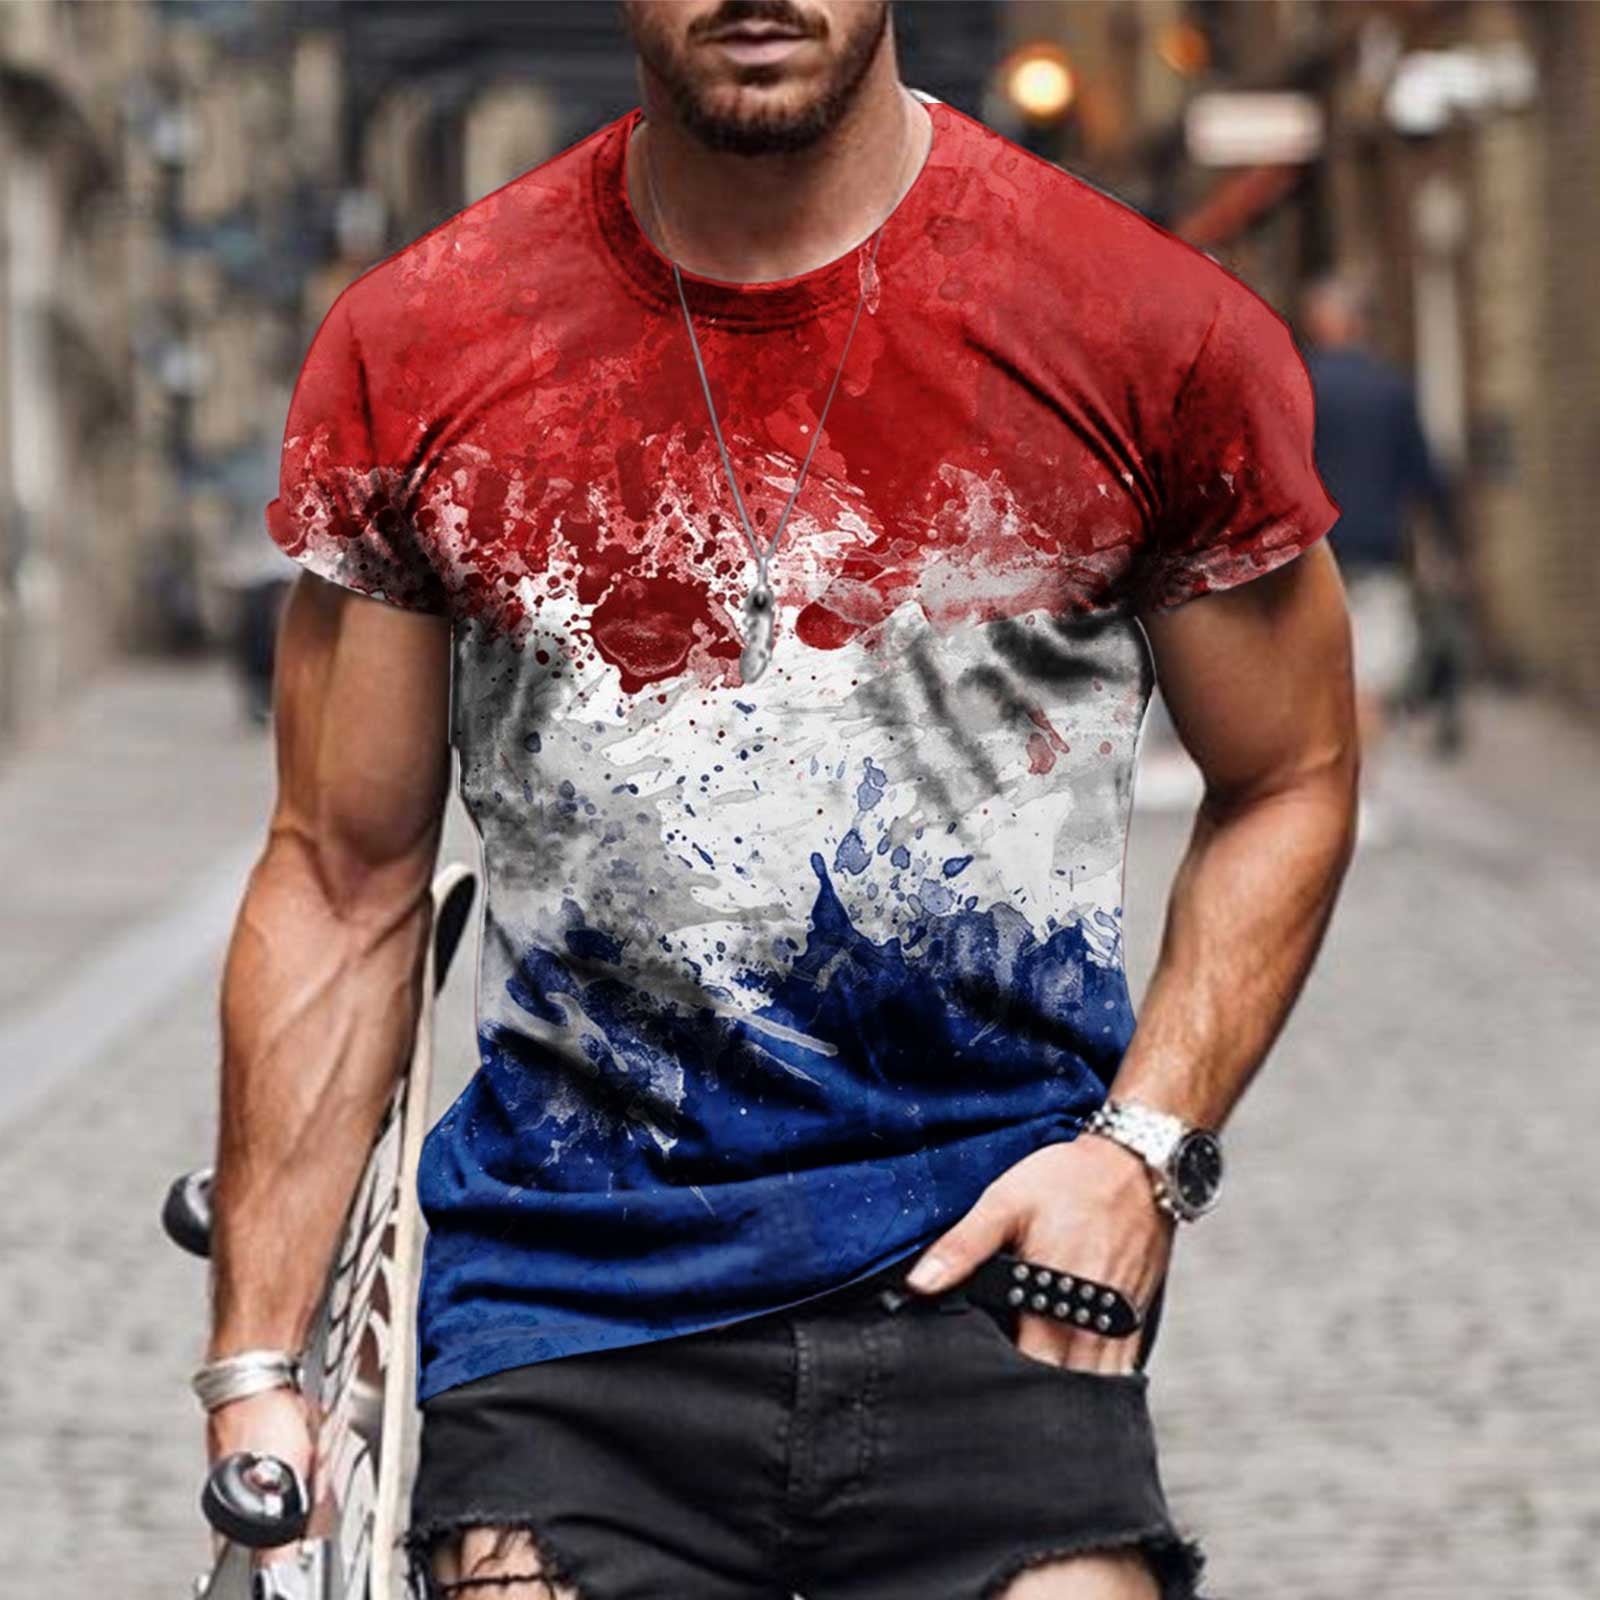 YYDGH Men's Vintage Independence Day American Flag T Shirt Graphic 4th of  July Fashion Casual Workout Tops Dark Red XL